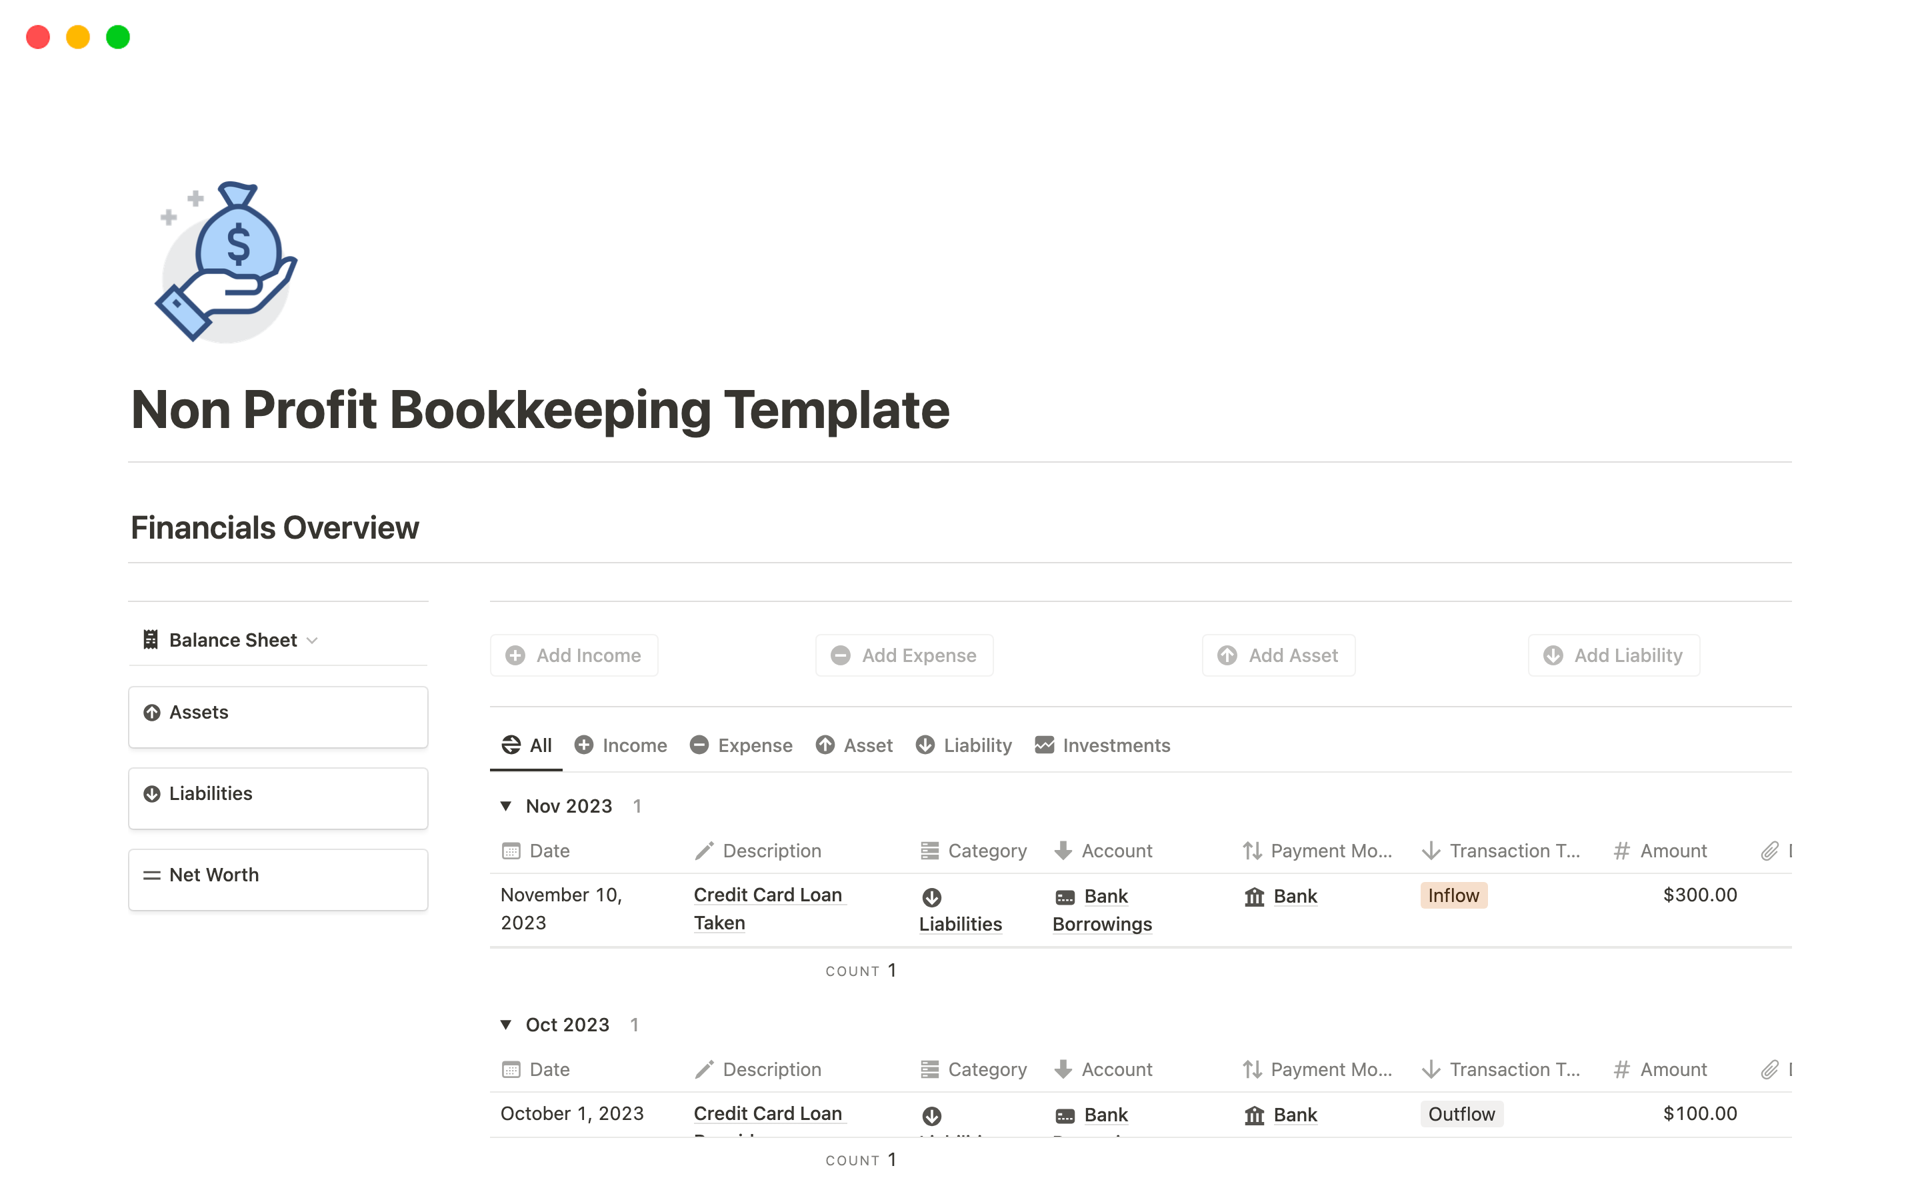 This bookkeeping template is a simple tool designed to help non profit organizations keep track of their financials including income and expenses, cash flow, tracking net worth, providing balance sheet and much more